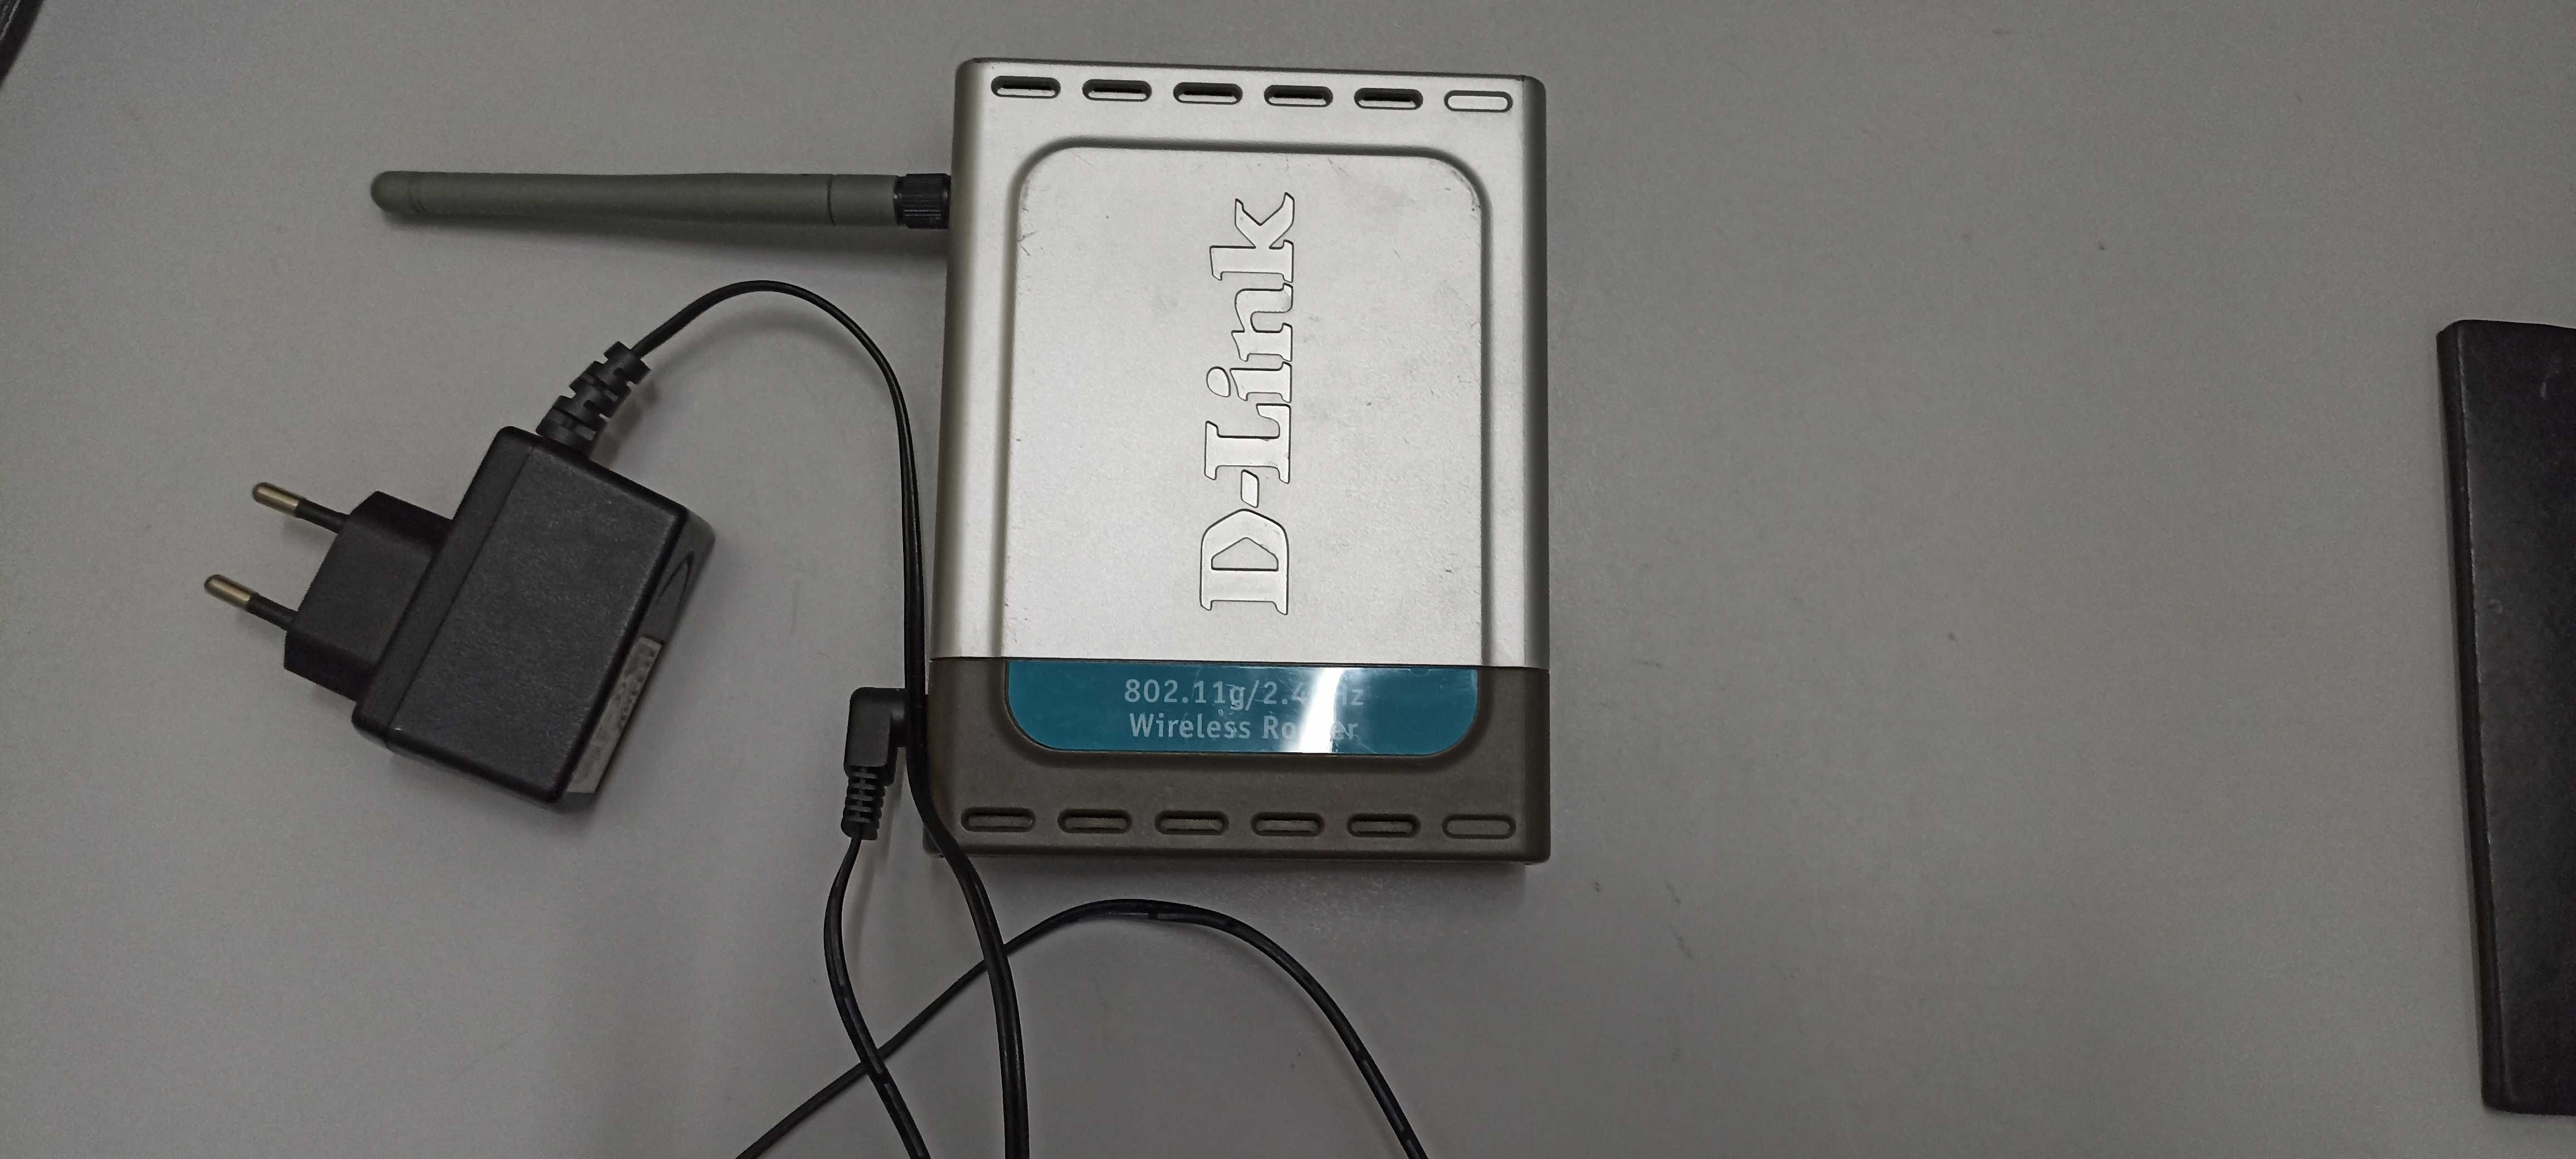 Router D-Link DI-524 wifi